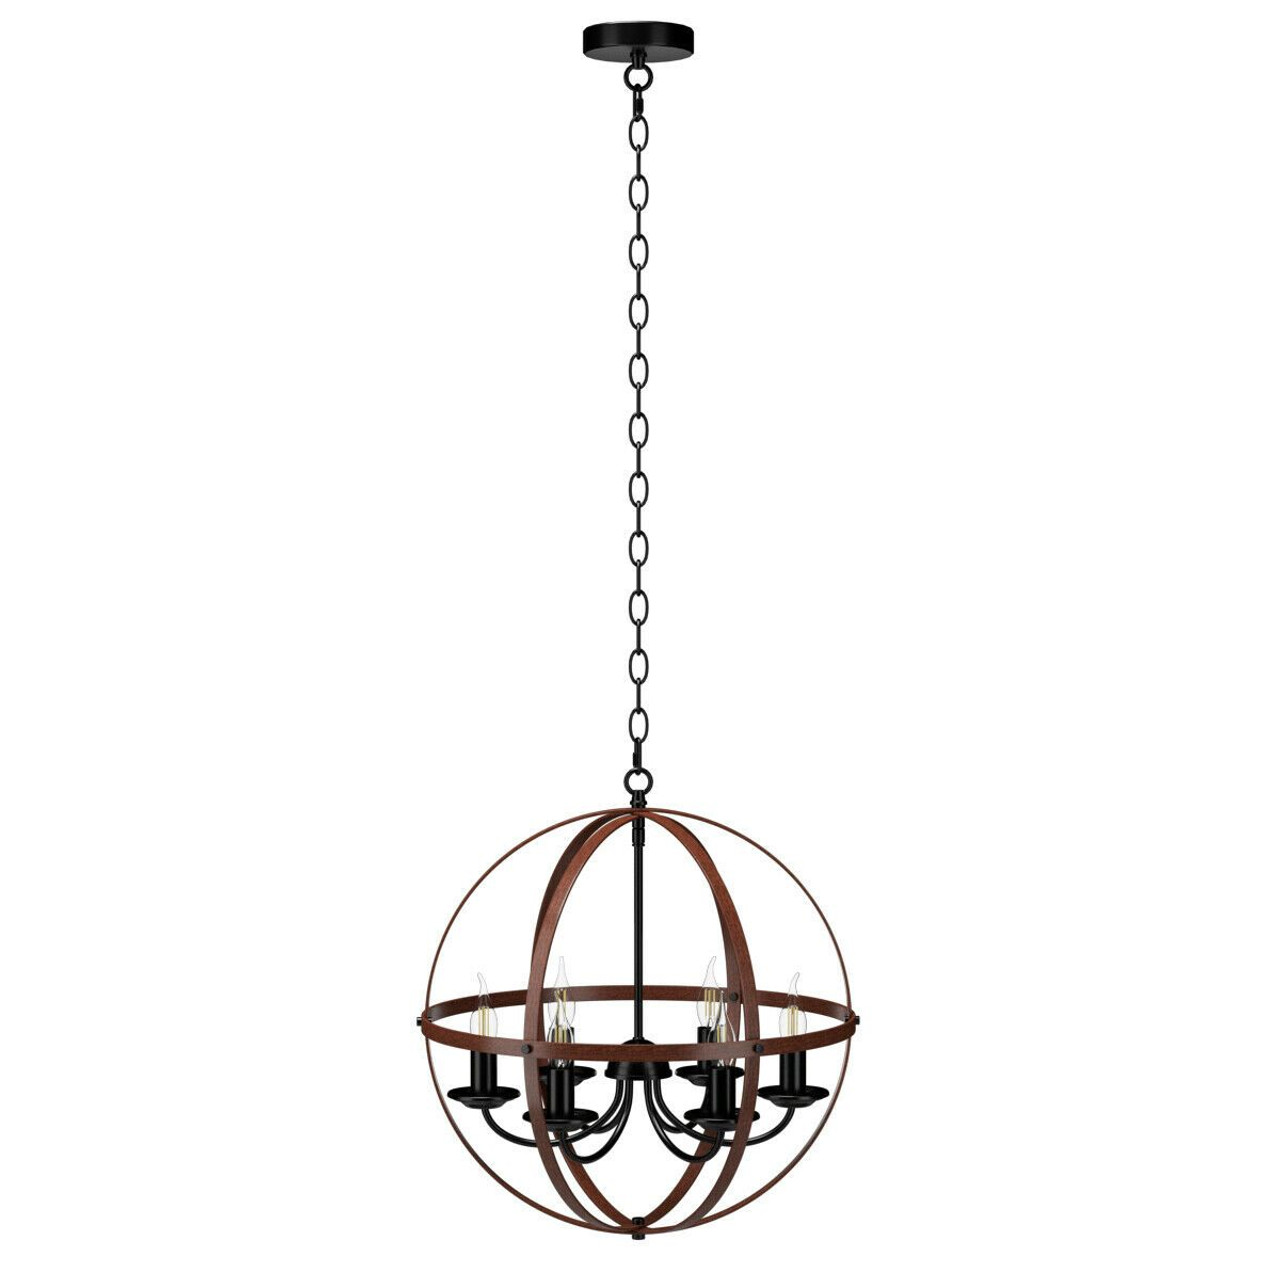 Rustic Vintage 6-Light Orb Chandelier with Bronze Finish product image